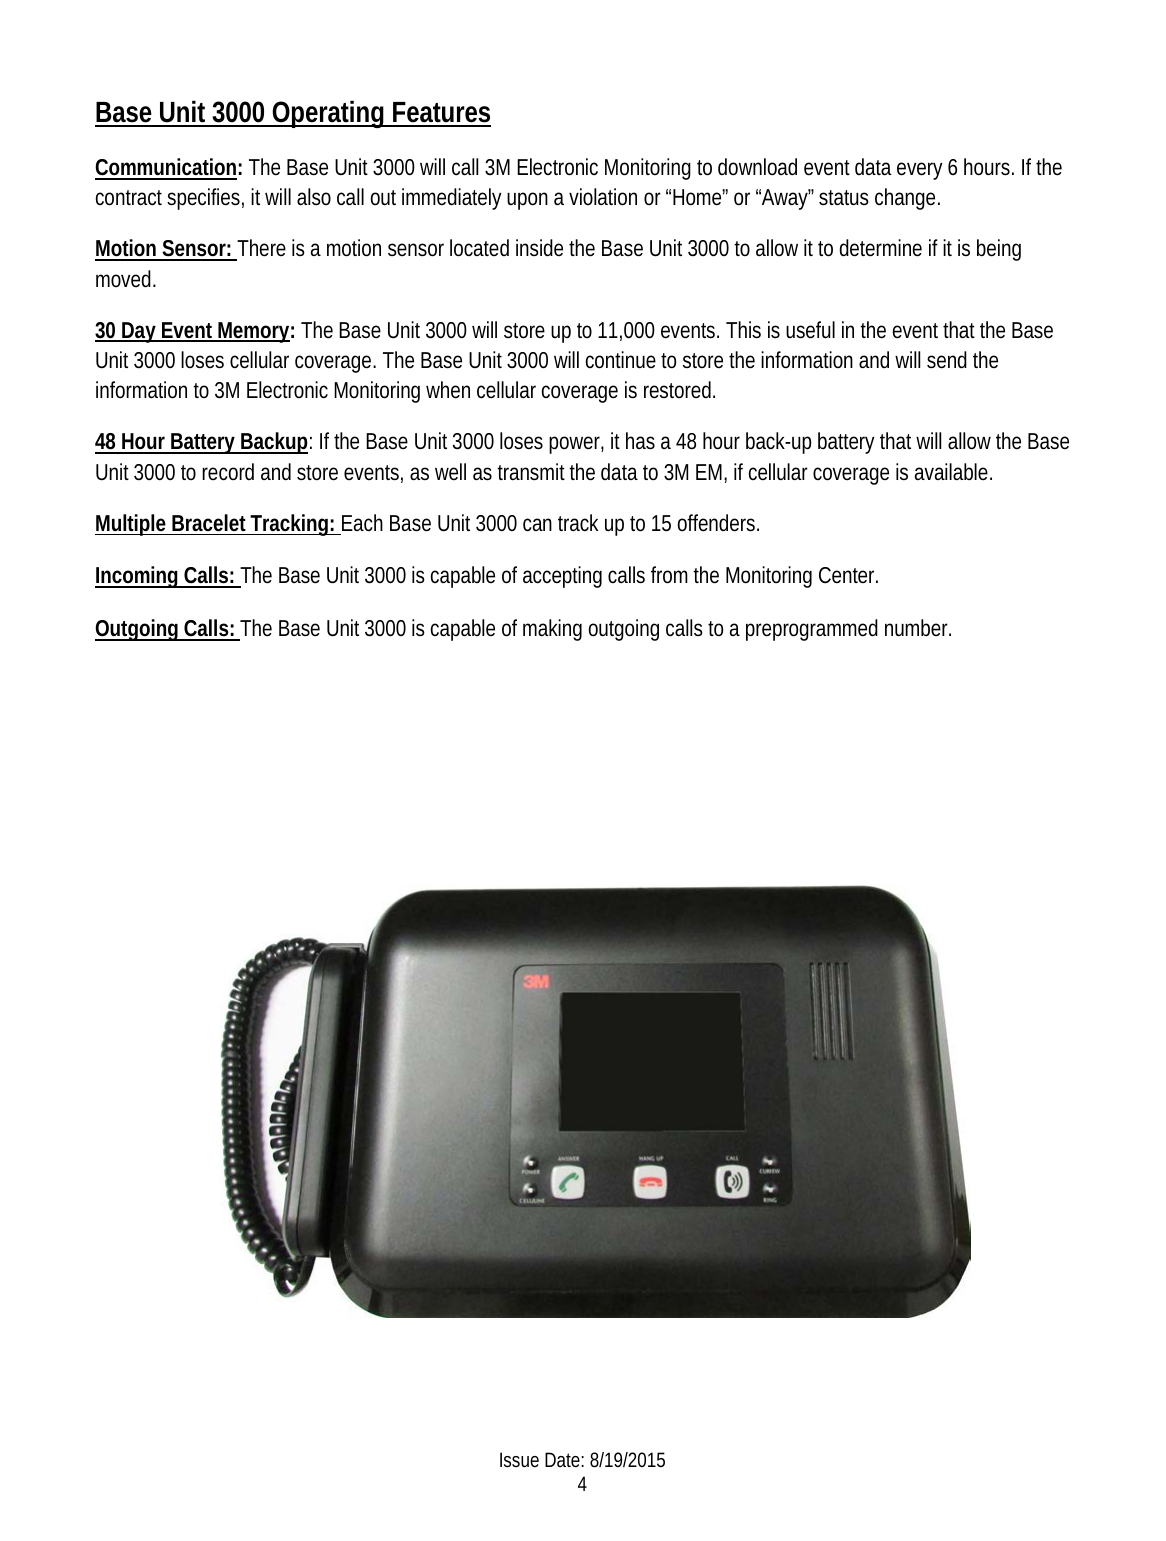 Base Unit 3000 Operating Features Communication: The Base Unit 3000 will call 3M Electronic Monitoring to download event data every 6 hours. If the contract specifies, it will also call out immediately upon a violation or “Home” or “Away” status change.  Motion Sensor: There is a motion sensor located inside the Base Unit 3000 to allow it to determine if it is being moved. 30 Day Event Memory: The Base Unit 3000 will store up to 11,000 events. This is useful in the event that the Base Unit 3000 loses cellular coverage. The Base Unit 3000 will continue to store the information and will send the information to 3M Electronic Monitoring when cellular coverage is restored. 48 Hour Battery Backup: If the Base Unit 3000 loses power, it has a 48 hour back-up battery that will allow the Base Unit 3000 to record and store events, as well as transmit the data to 3M EM, if cellular coverage is available. Multiple Bracelet Tracking: Each Base Unit 3000 can track up to 15 offenders.  Incoming Calls: The Base Unit 3000 is capable of accepting calls from the Monitoring Center.  Outgoing Calls: The Base Unit 3000 is capable of making outgoing calls to a preprogrammed number.               Issue Date: 8/19/2015 4  